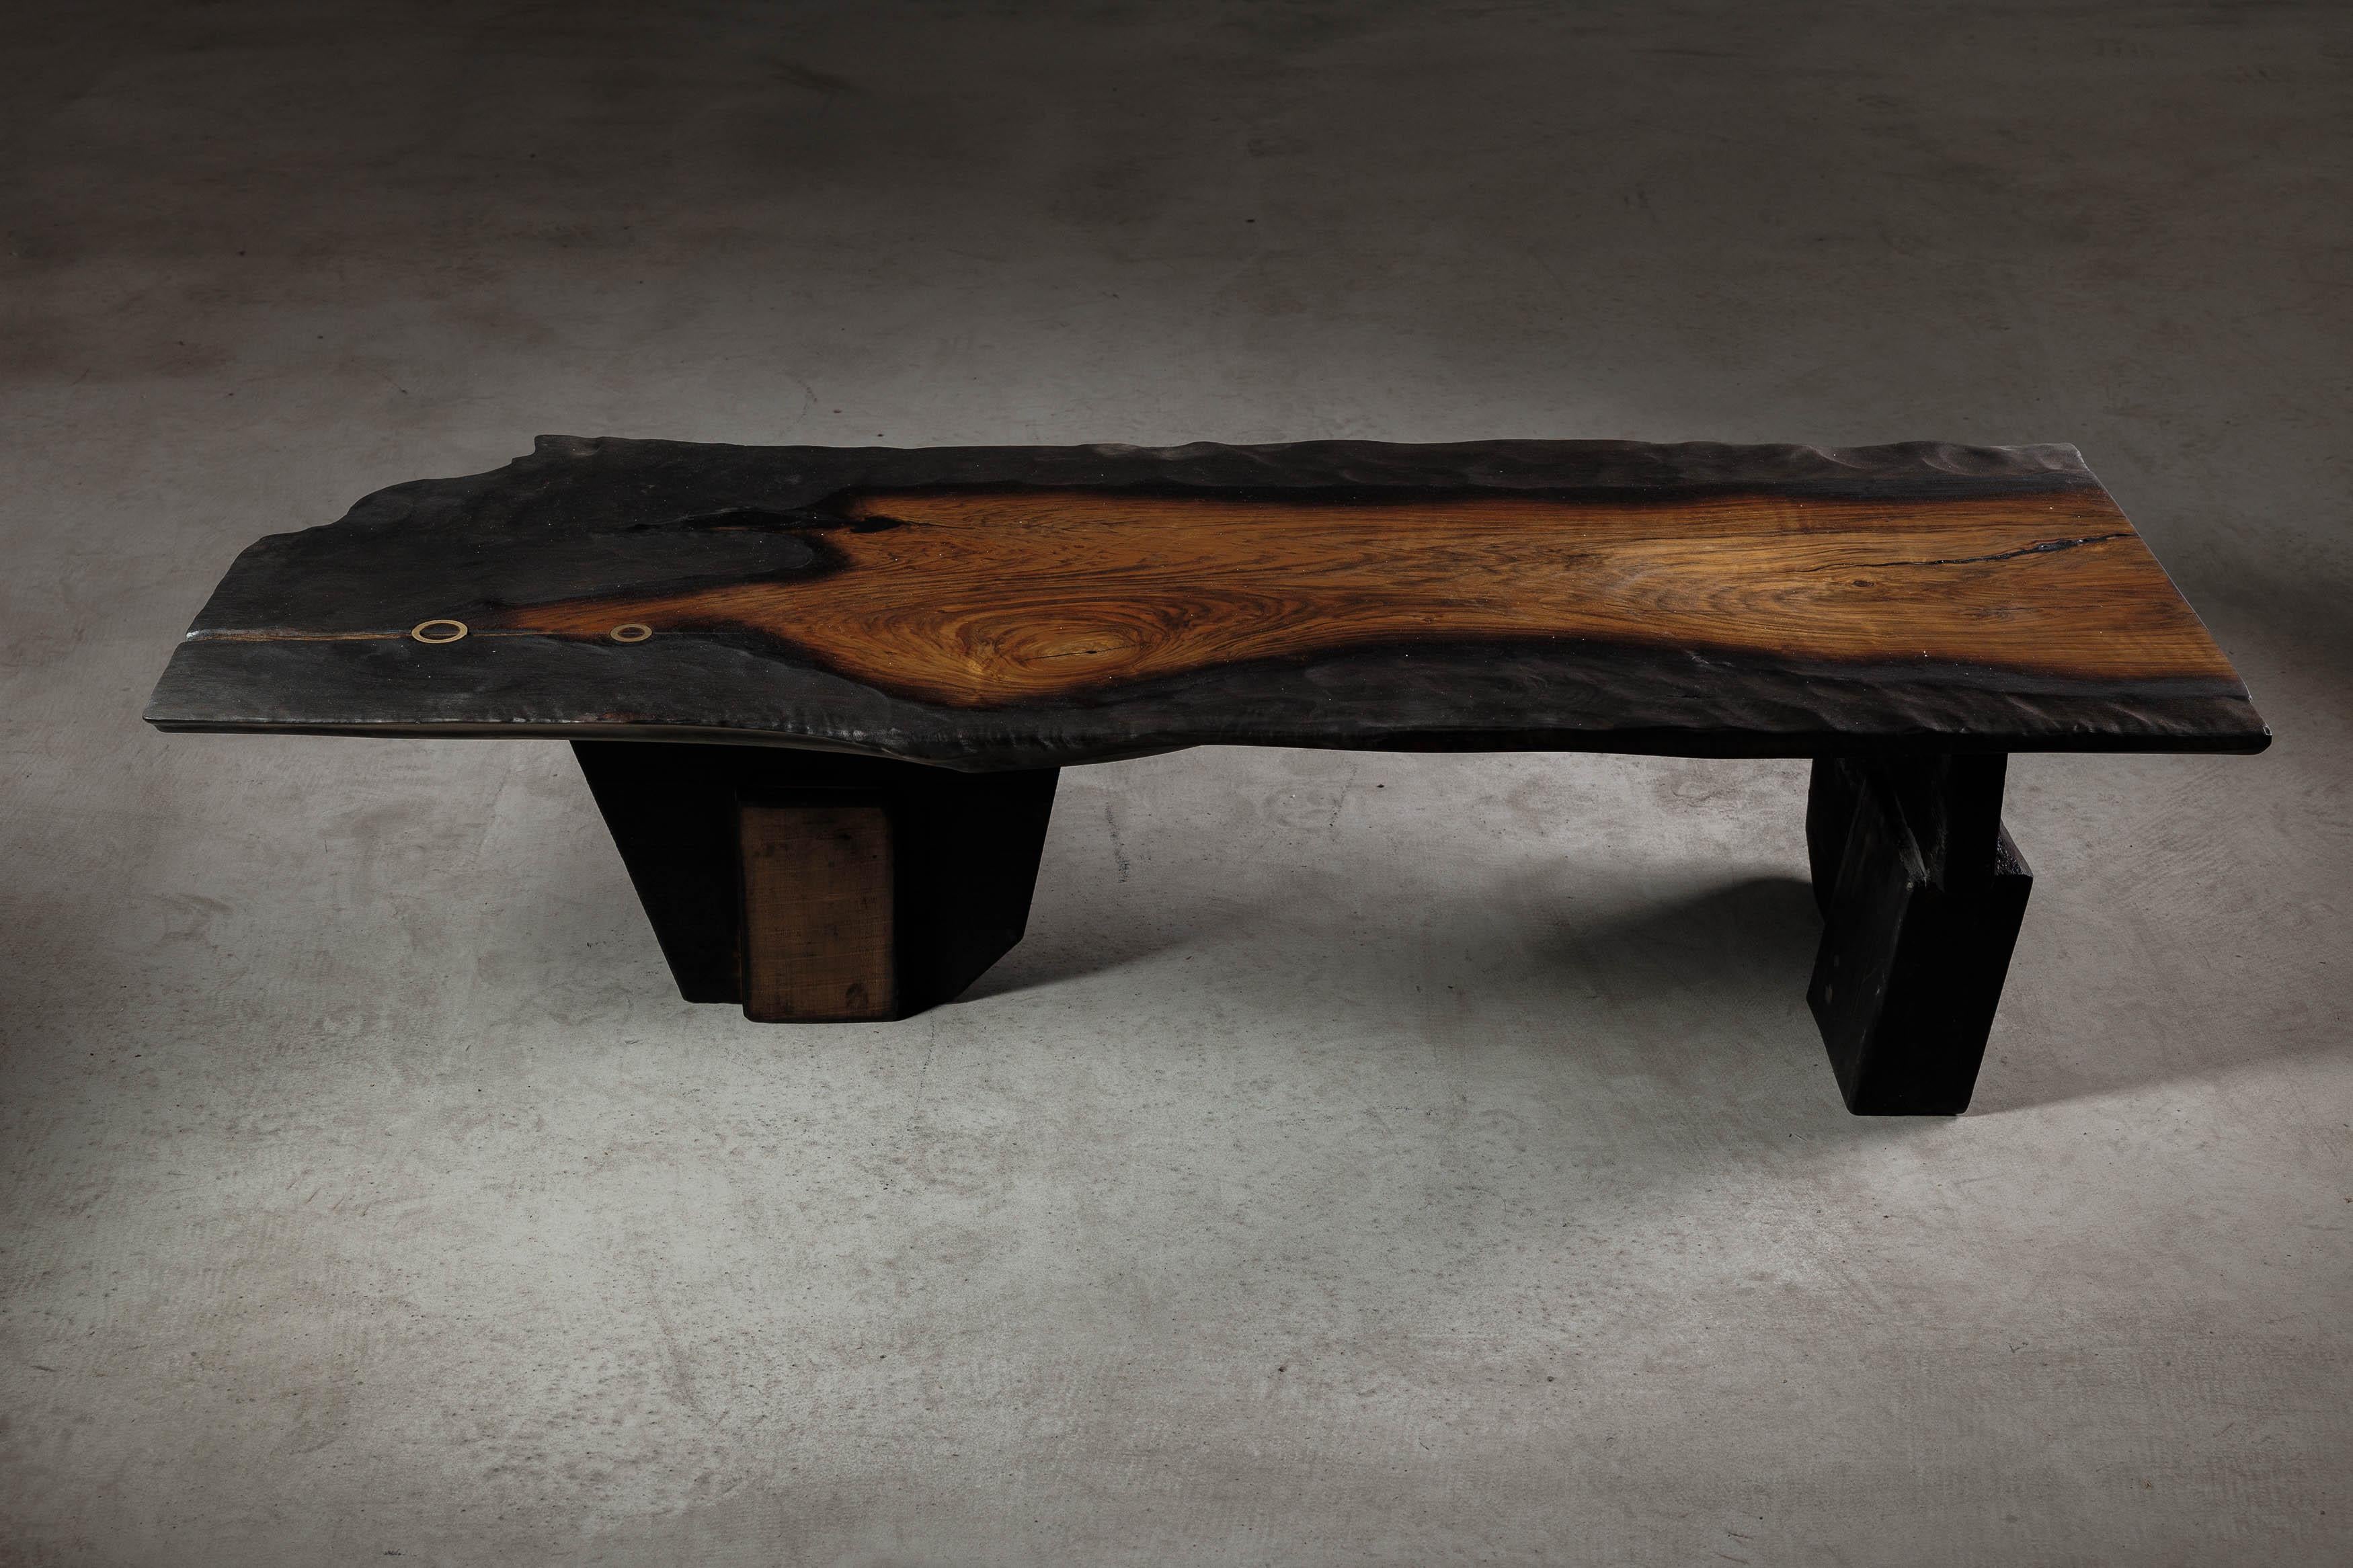 EM107 coffee table by Eero Moss
One of a kind
Dimensions; W 145 x D 55 x H 36 cm
Materials: Walnut, charred ash, India ink.
Finish: Natural oils.

18 Brut Collection

The latest collection by the artist is a tribute to the brutalist